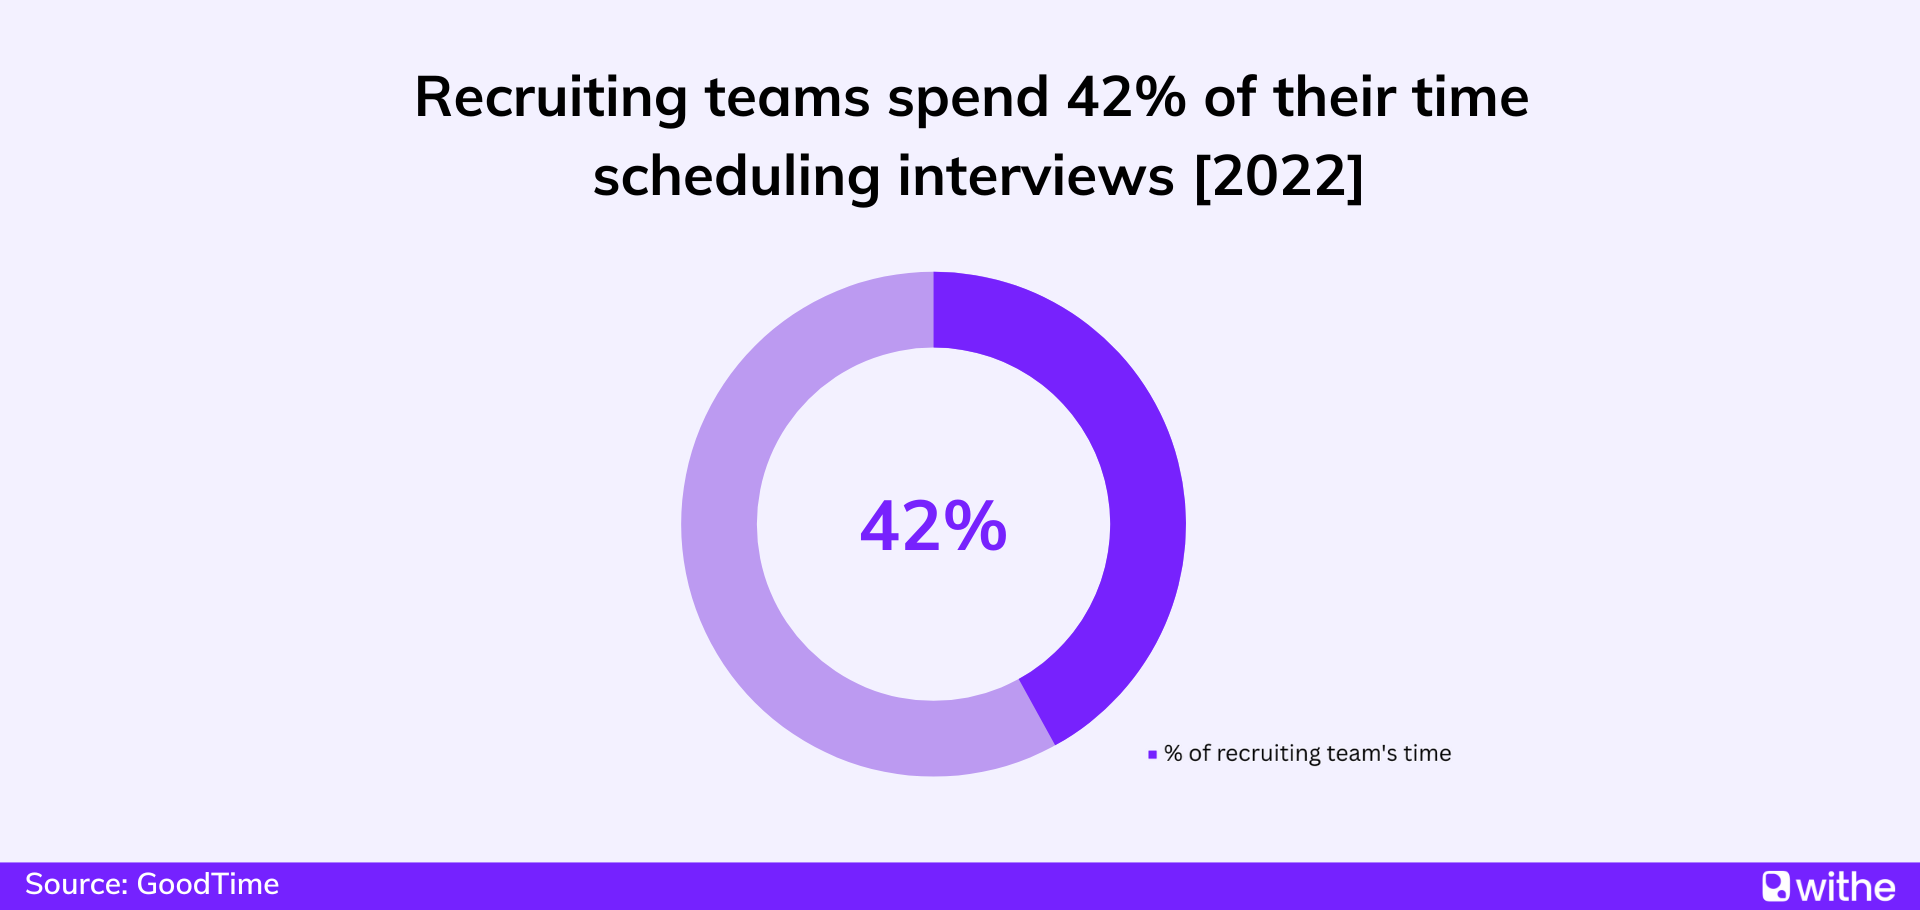 Job interview statistics - In 2022, recruiting teams spend 42% of their time scheduling interviews